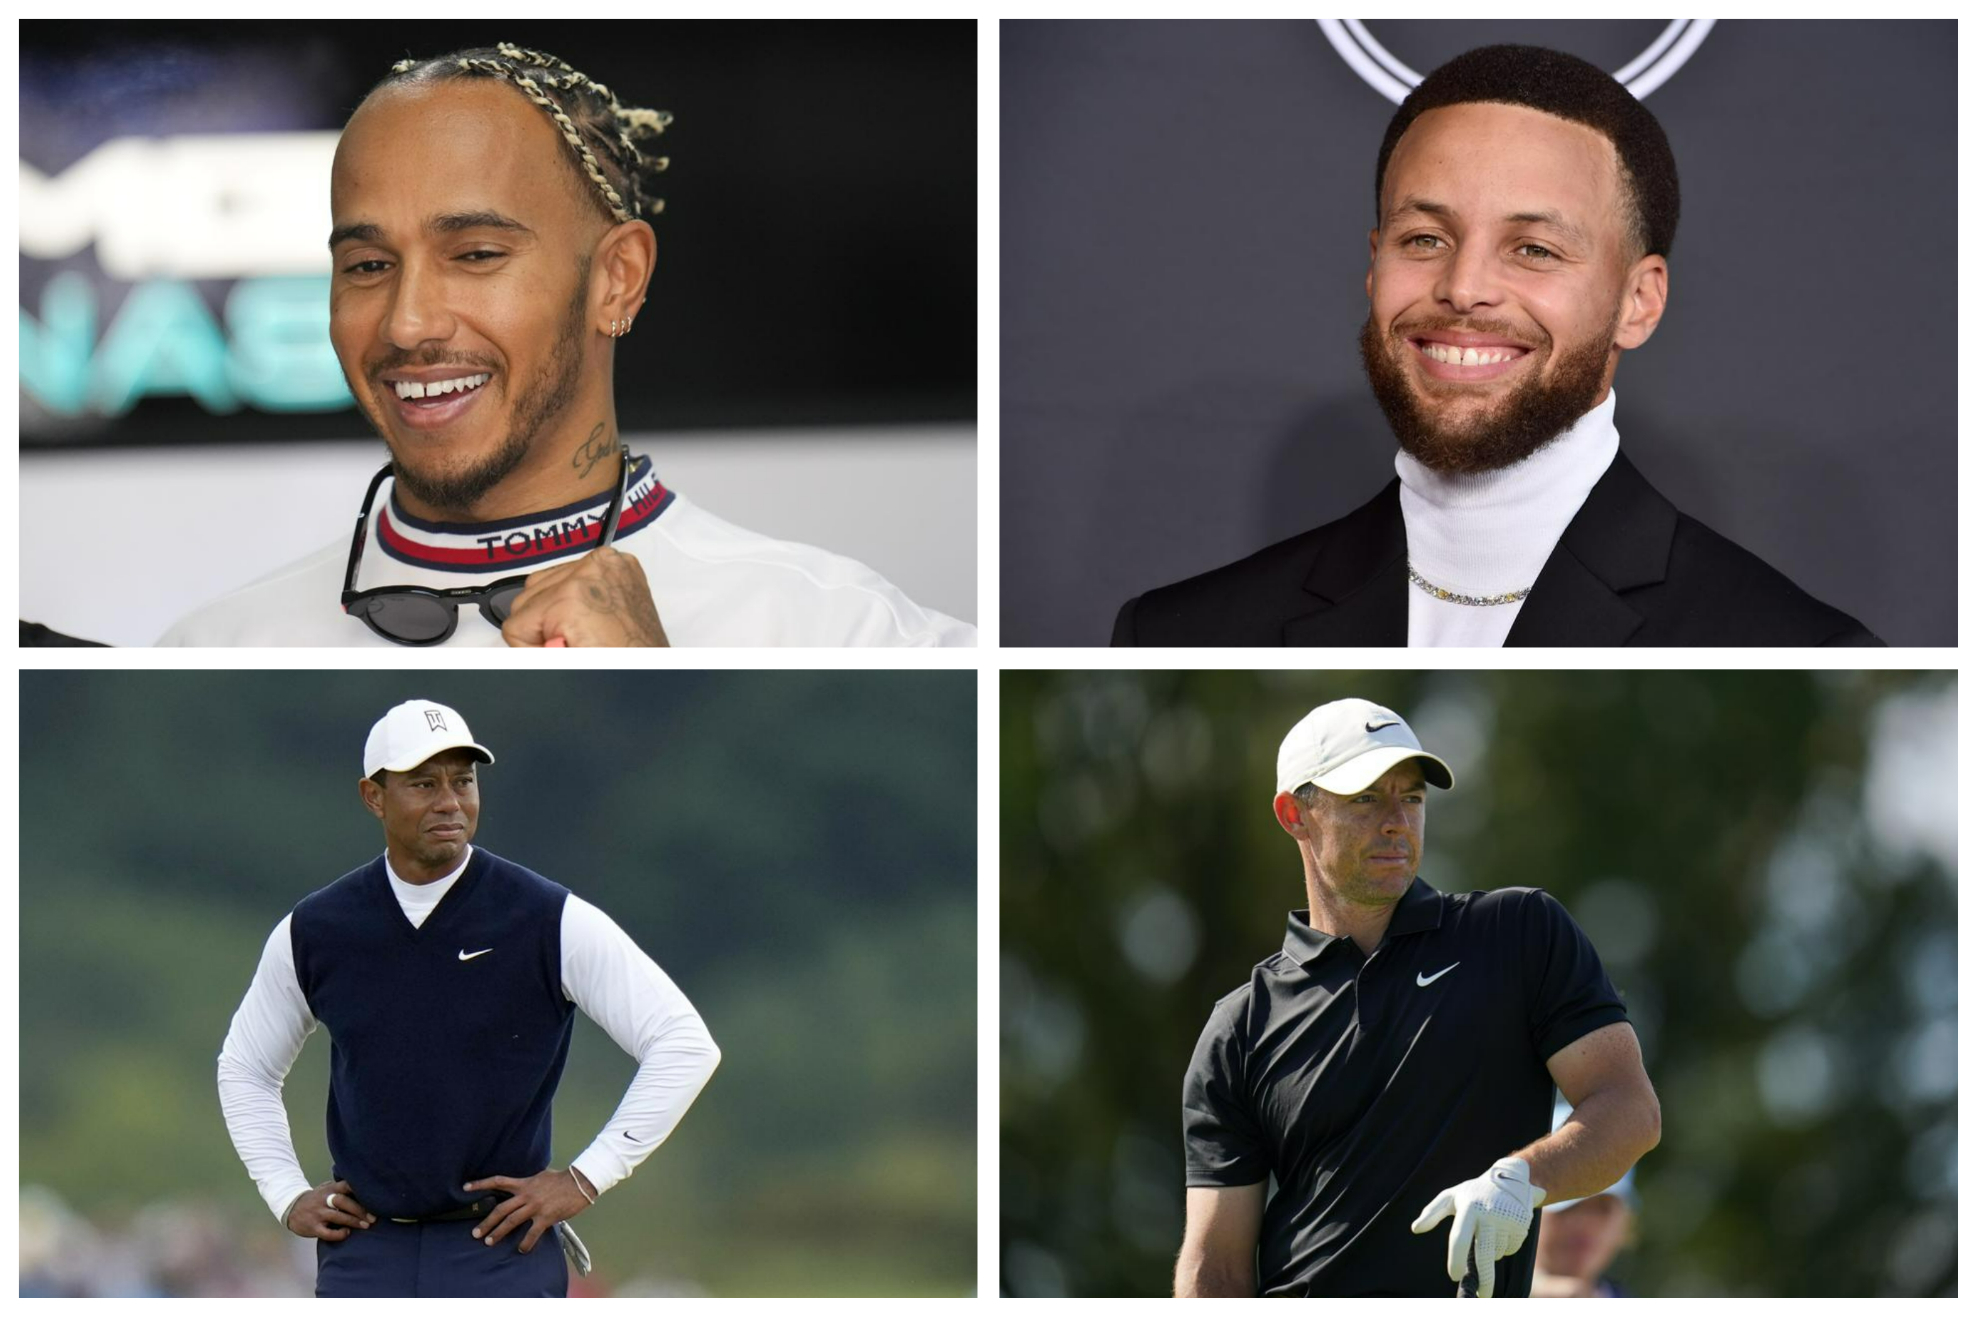 Lewis Hamilton, Stephen Curry, Tiger Woods, Rory McIlroy and many more athletes join the venture.